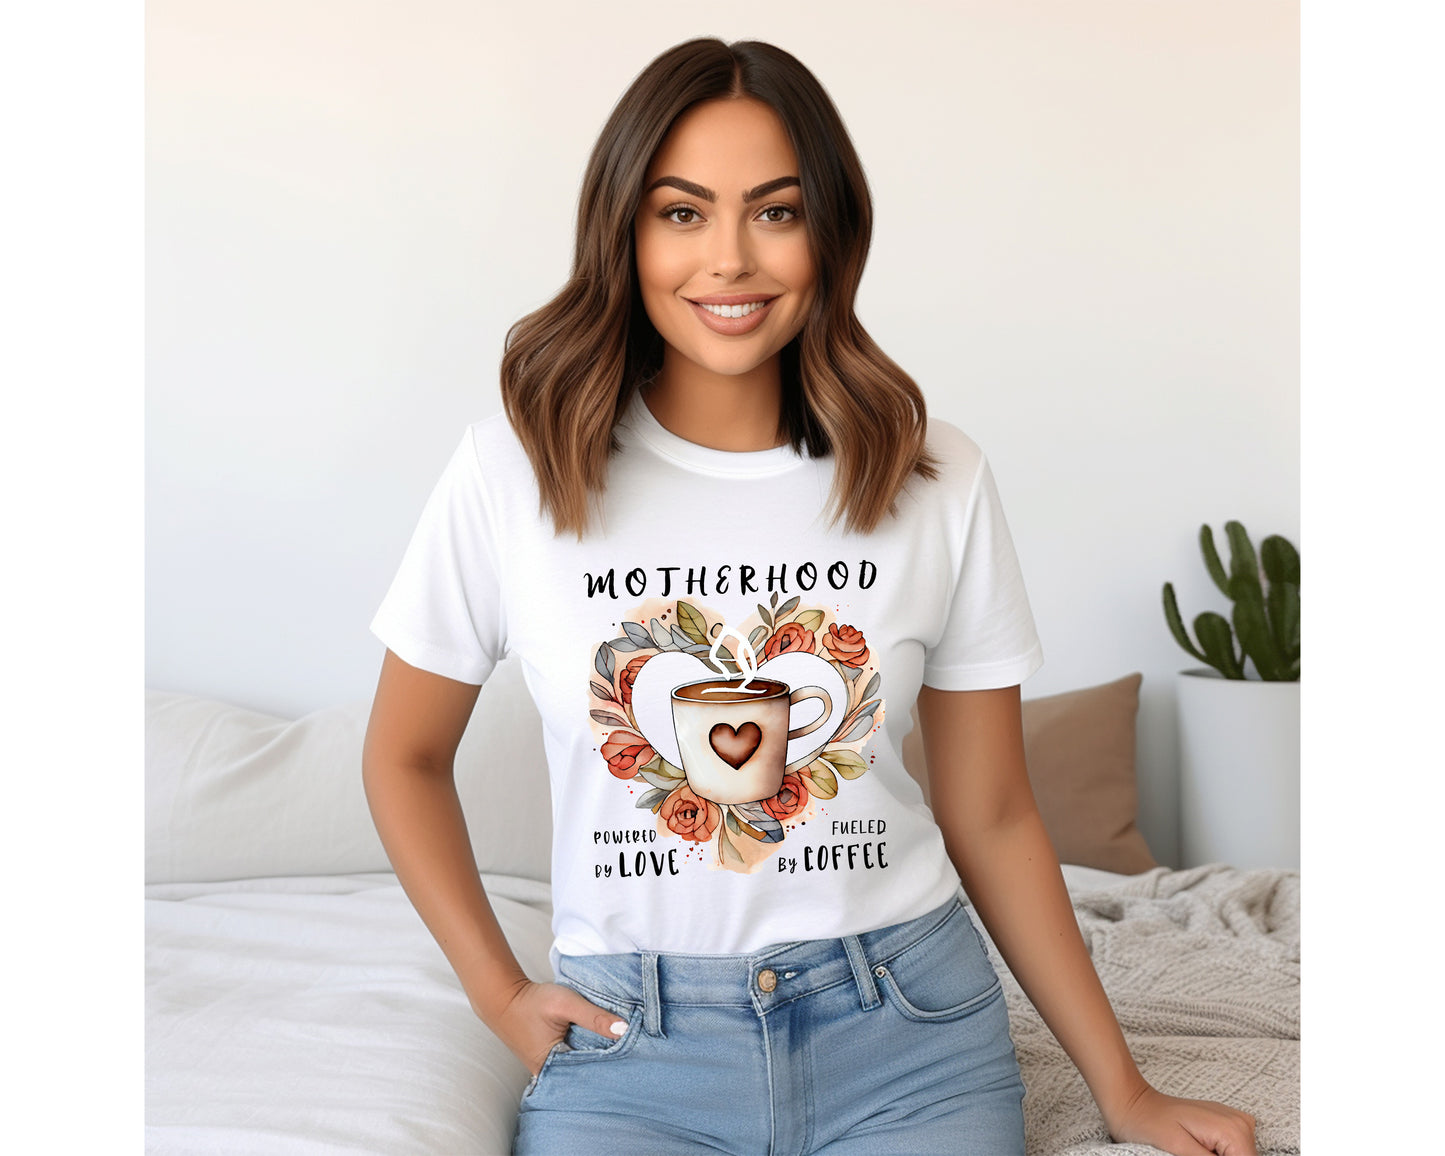 Motherhood Shirt, Powered by Love Fueled by Coffee, T Shirt